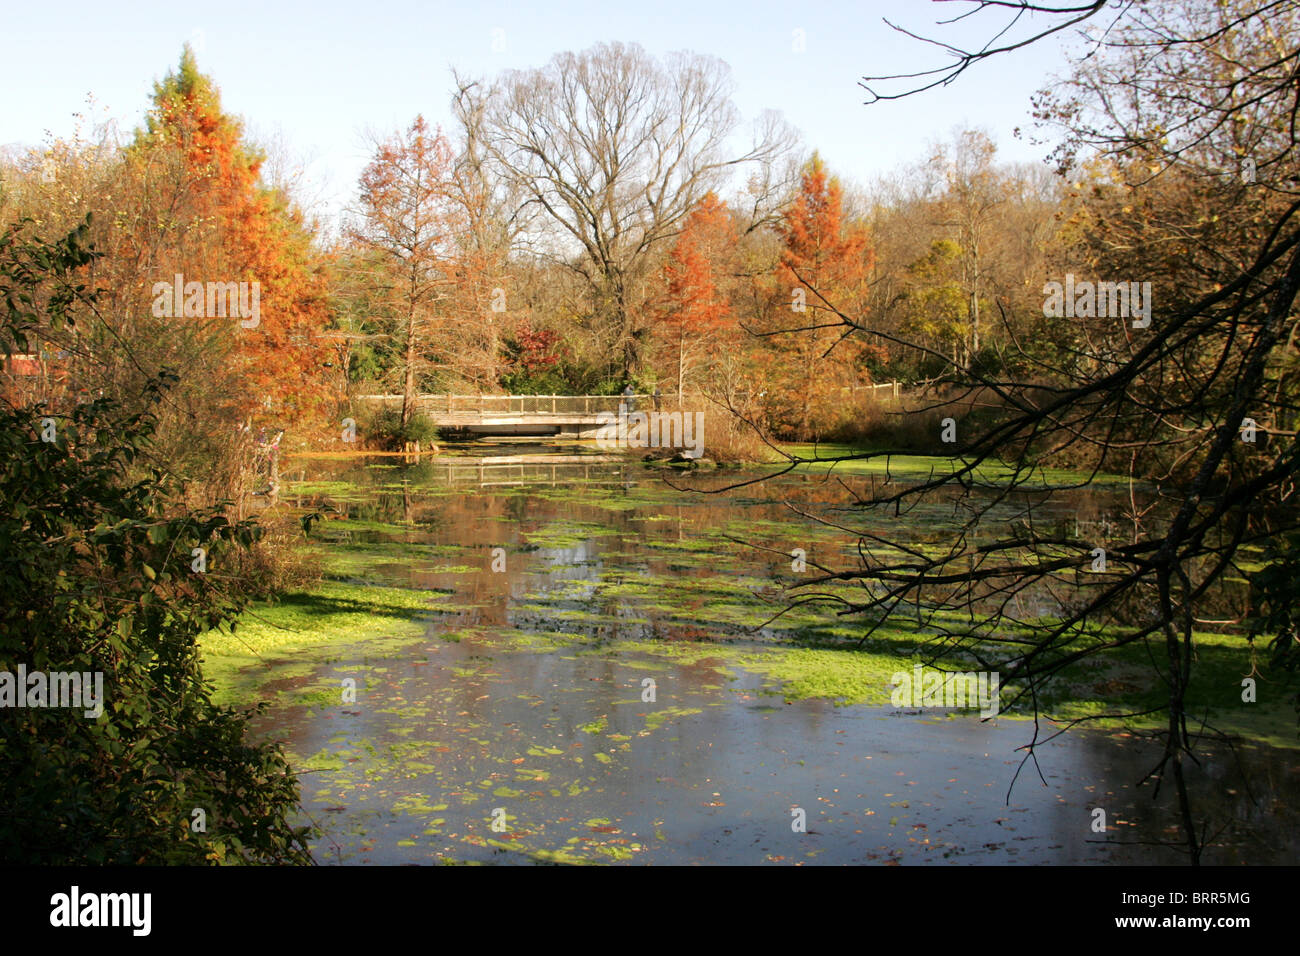 The Lake at the Nashville Zoo with trees in autumn colours Stock Photo